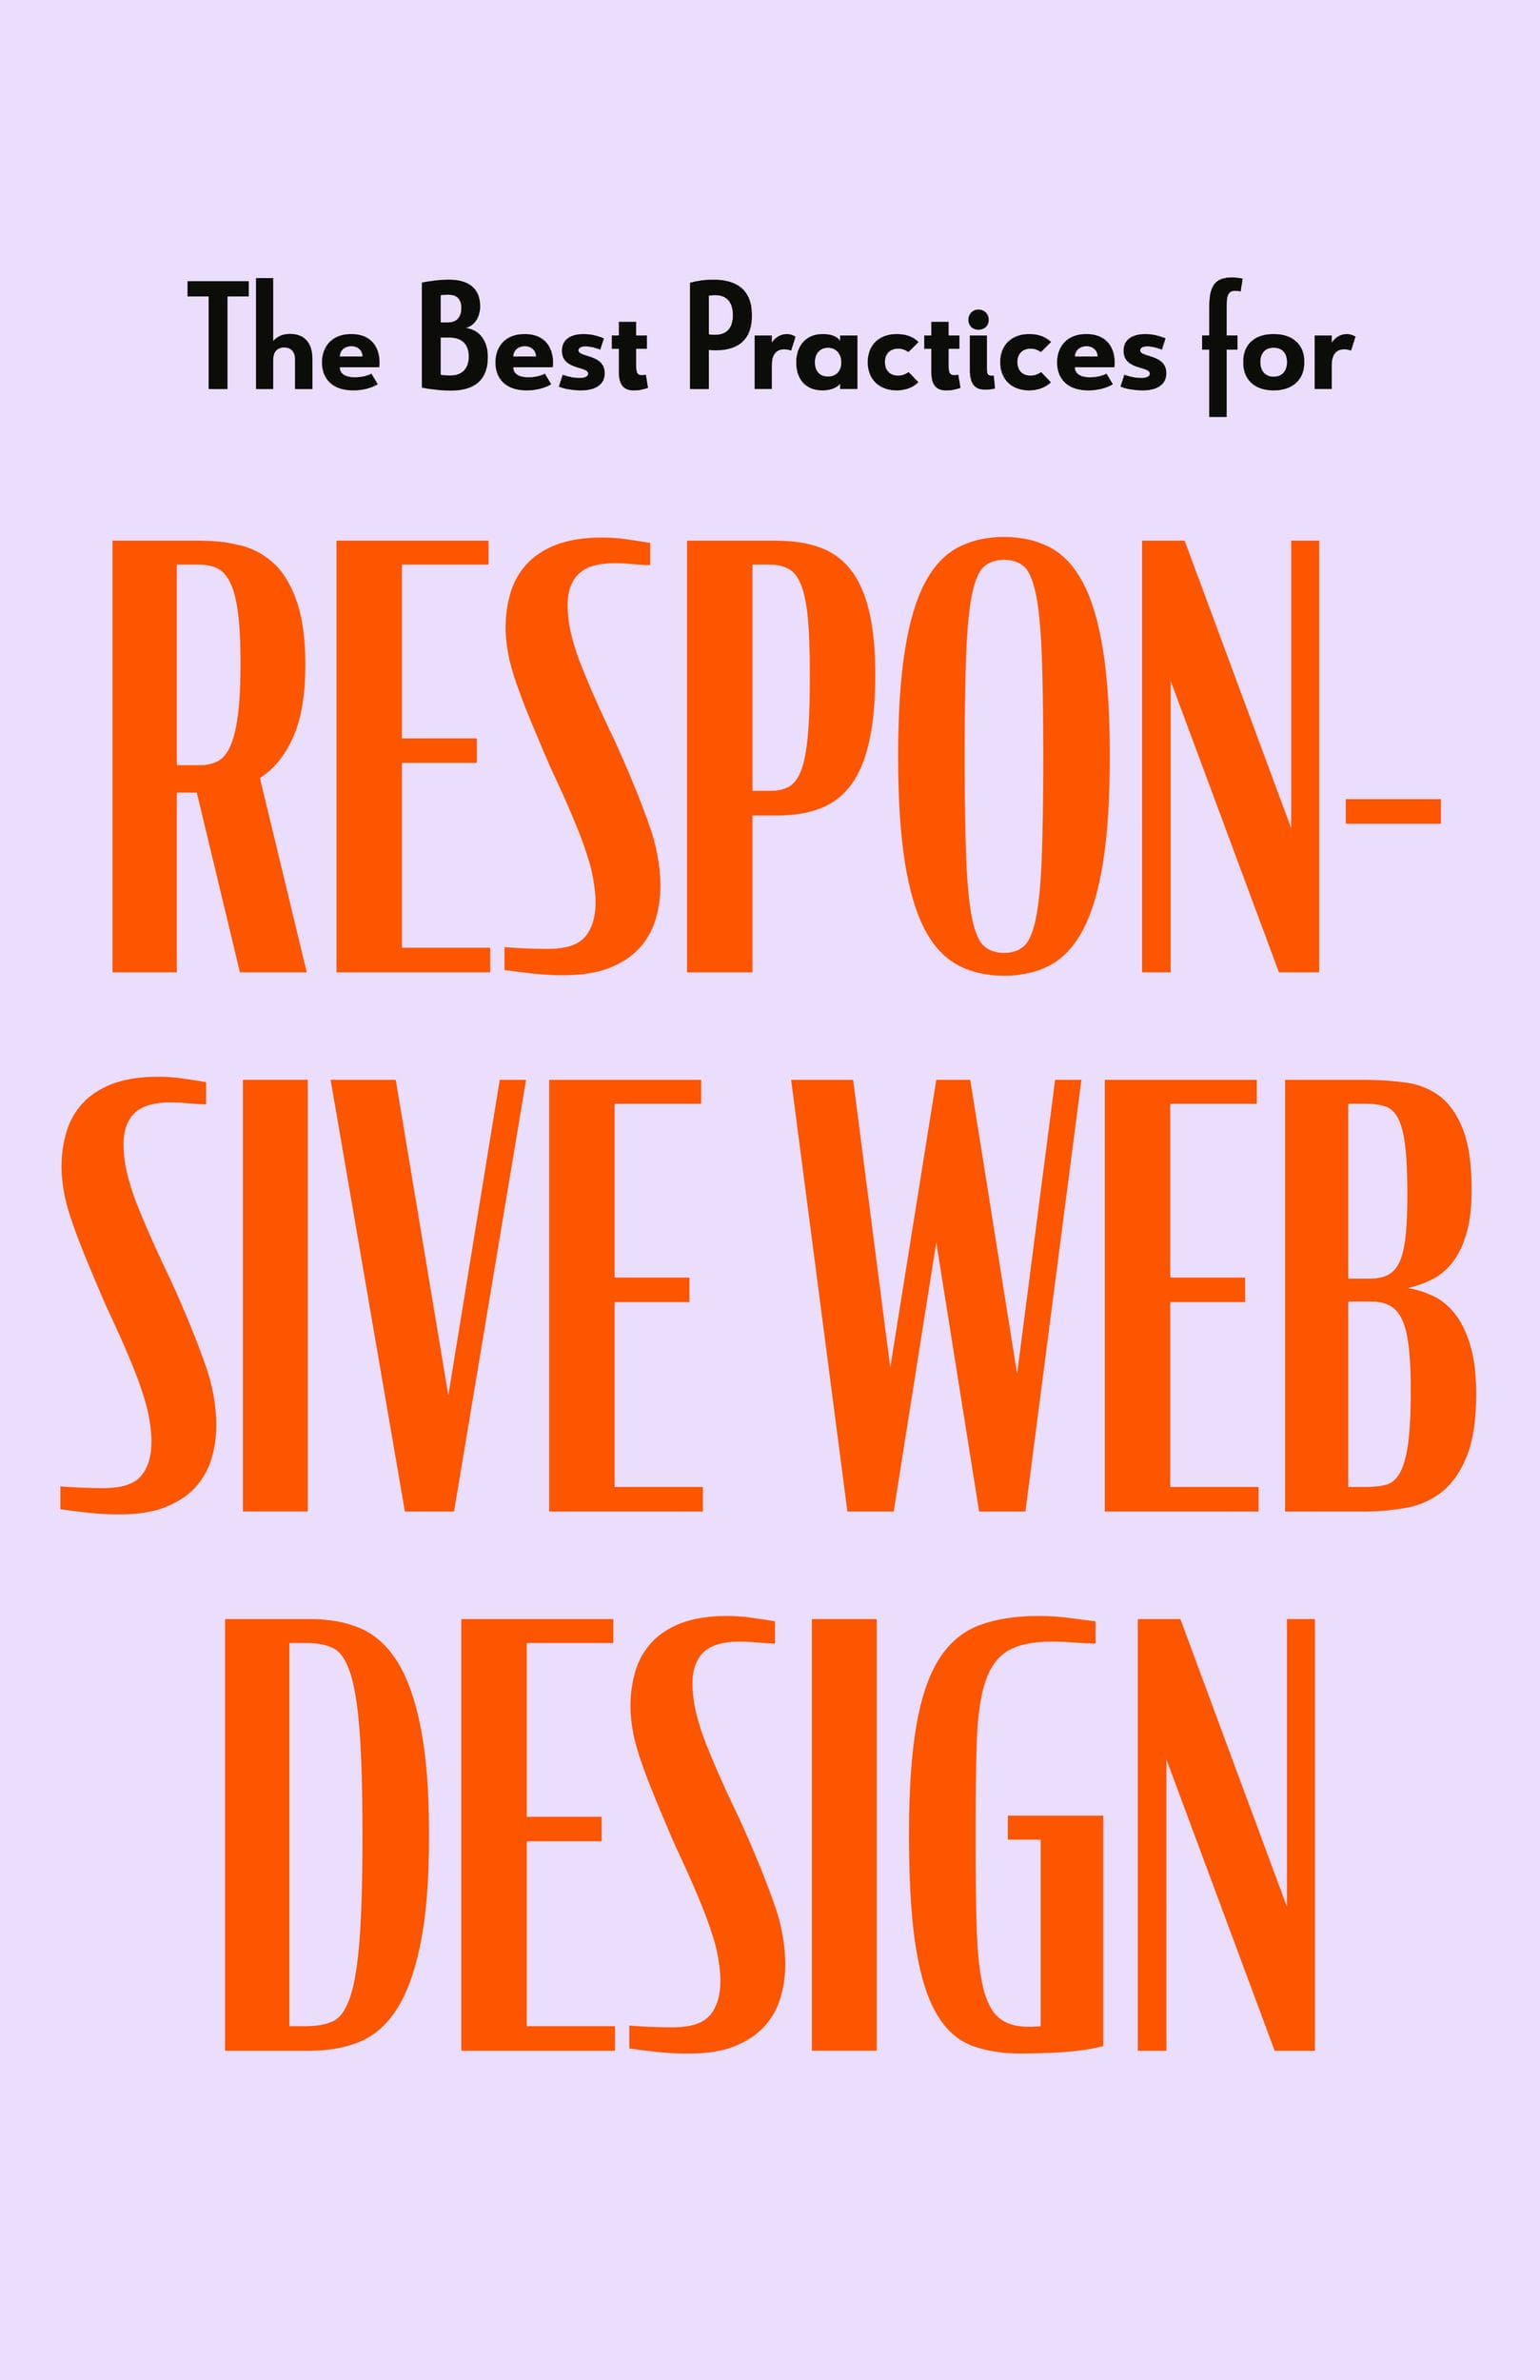 The Best Practices for Responsive Web Design